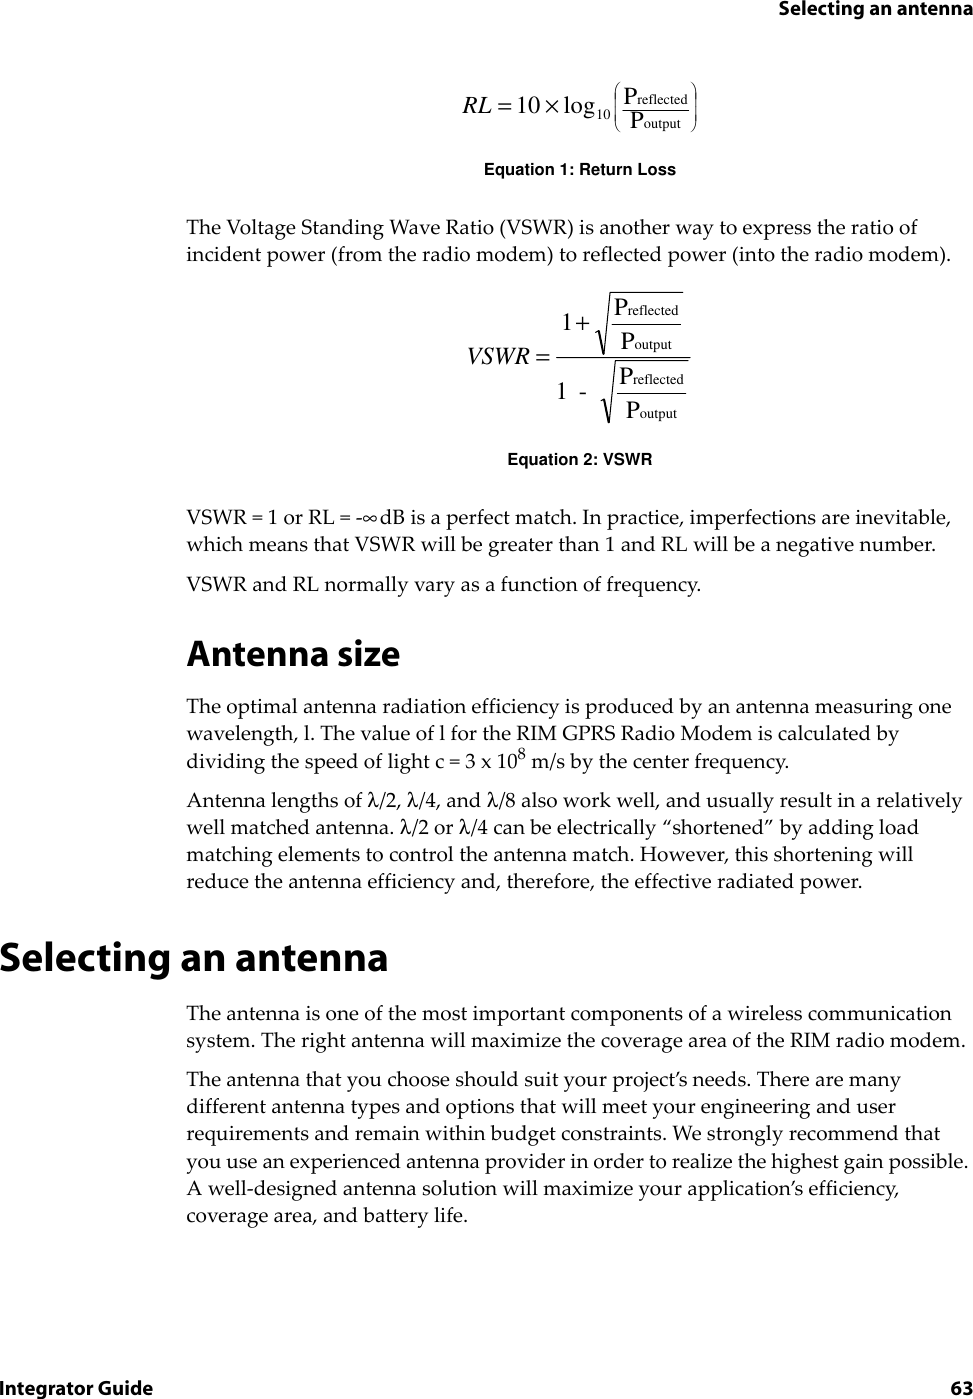 Selecting an antennaIntegrator Guide 63Equation 1: Return LossThe Voltage Standing Wave Ratio (VSWR) is another way to express the ratio of incident power (from the radio modem) to reflected power (into the radio modem).Equation 2: VSWRVSWR=1 or RL=-∞dB is a perfect match. In practice, imperfections are inevitable, which means that VSWR will be greater than 1 and RL will be a negative number.VSWR and RL normally vary as a function of frequency.Antenna sizeThe optimal antenna radiation efficiency is produced by an antenna measuring one wavelength, l. The value of l for the RIM GPRS Radio Modem is calculated by dividing the speed of light c = 3 x 108 m/s by the center frequency. Antenna lengths of λ/2, λ/4, and λ/8 also work well, and usually result in a relatively well matched antenna. λ/2 or λ/4 can be electrically “shortened” by adding load matching elements to control the antenna match. However, this shortening will reduce the antenna efficiency and, therefore, the effective radiated power.Selecting an antennaThe antenna is one of the most important components of a wireless communication system. The right antenna will maximize the coverage area of the RIM radio modem.The antenna that you choose should suit your project’s needs. There are many different antenna types and options that will meet your engineering and user requirements and remain within budget constraints. We strongly recommend that you use an experienced antenna provider in order to realize the highest gain possible. A well-designed antenna solution will maximize your application’s efficiency, coverage area, and battery life.RL =× 10 10log PPreflectedoutputVSWR =+1PP1 -   PPreflectedoutputreflectedoutput